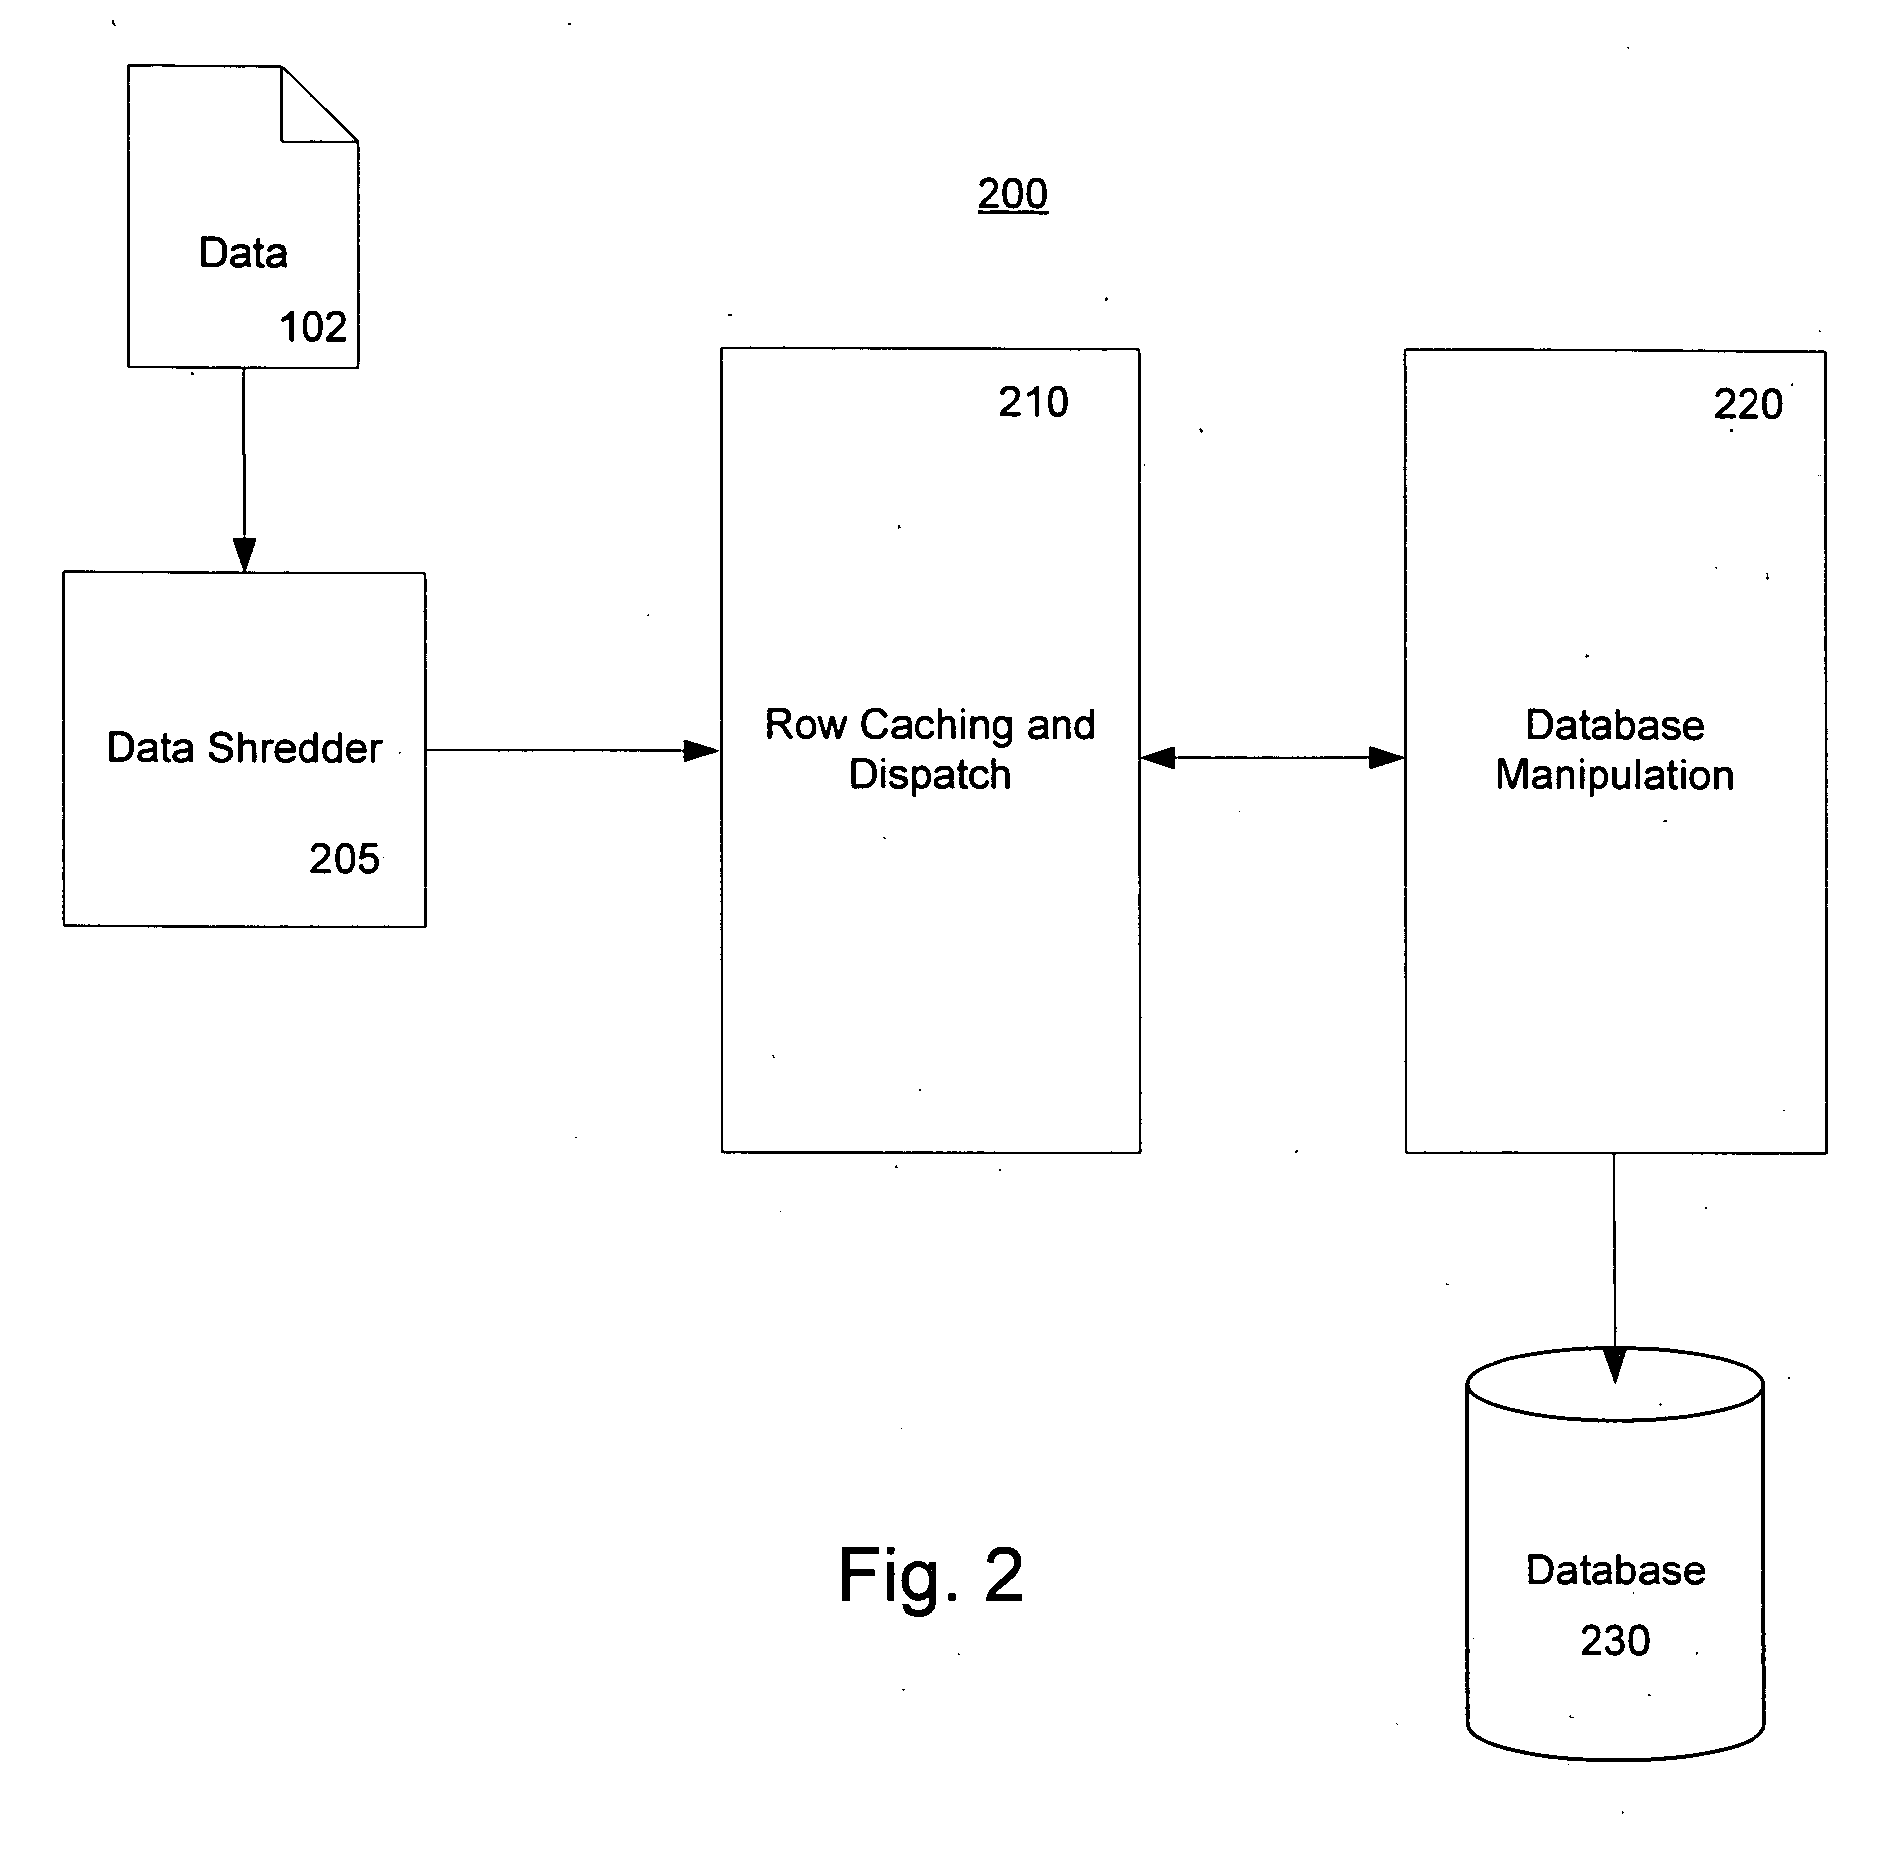 Method and system for importing data